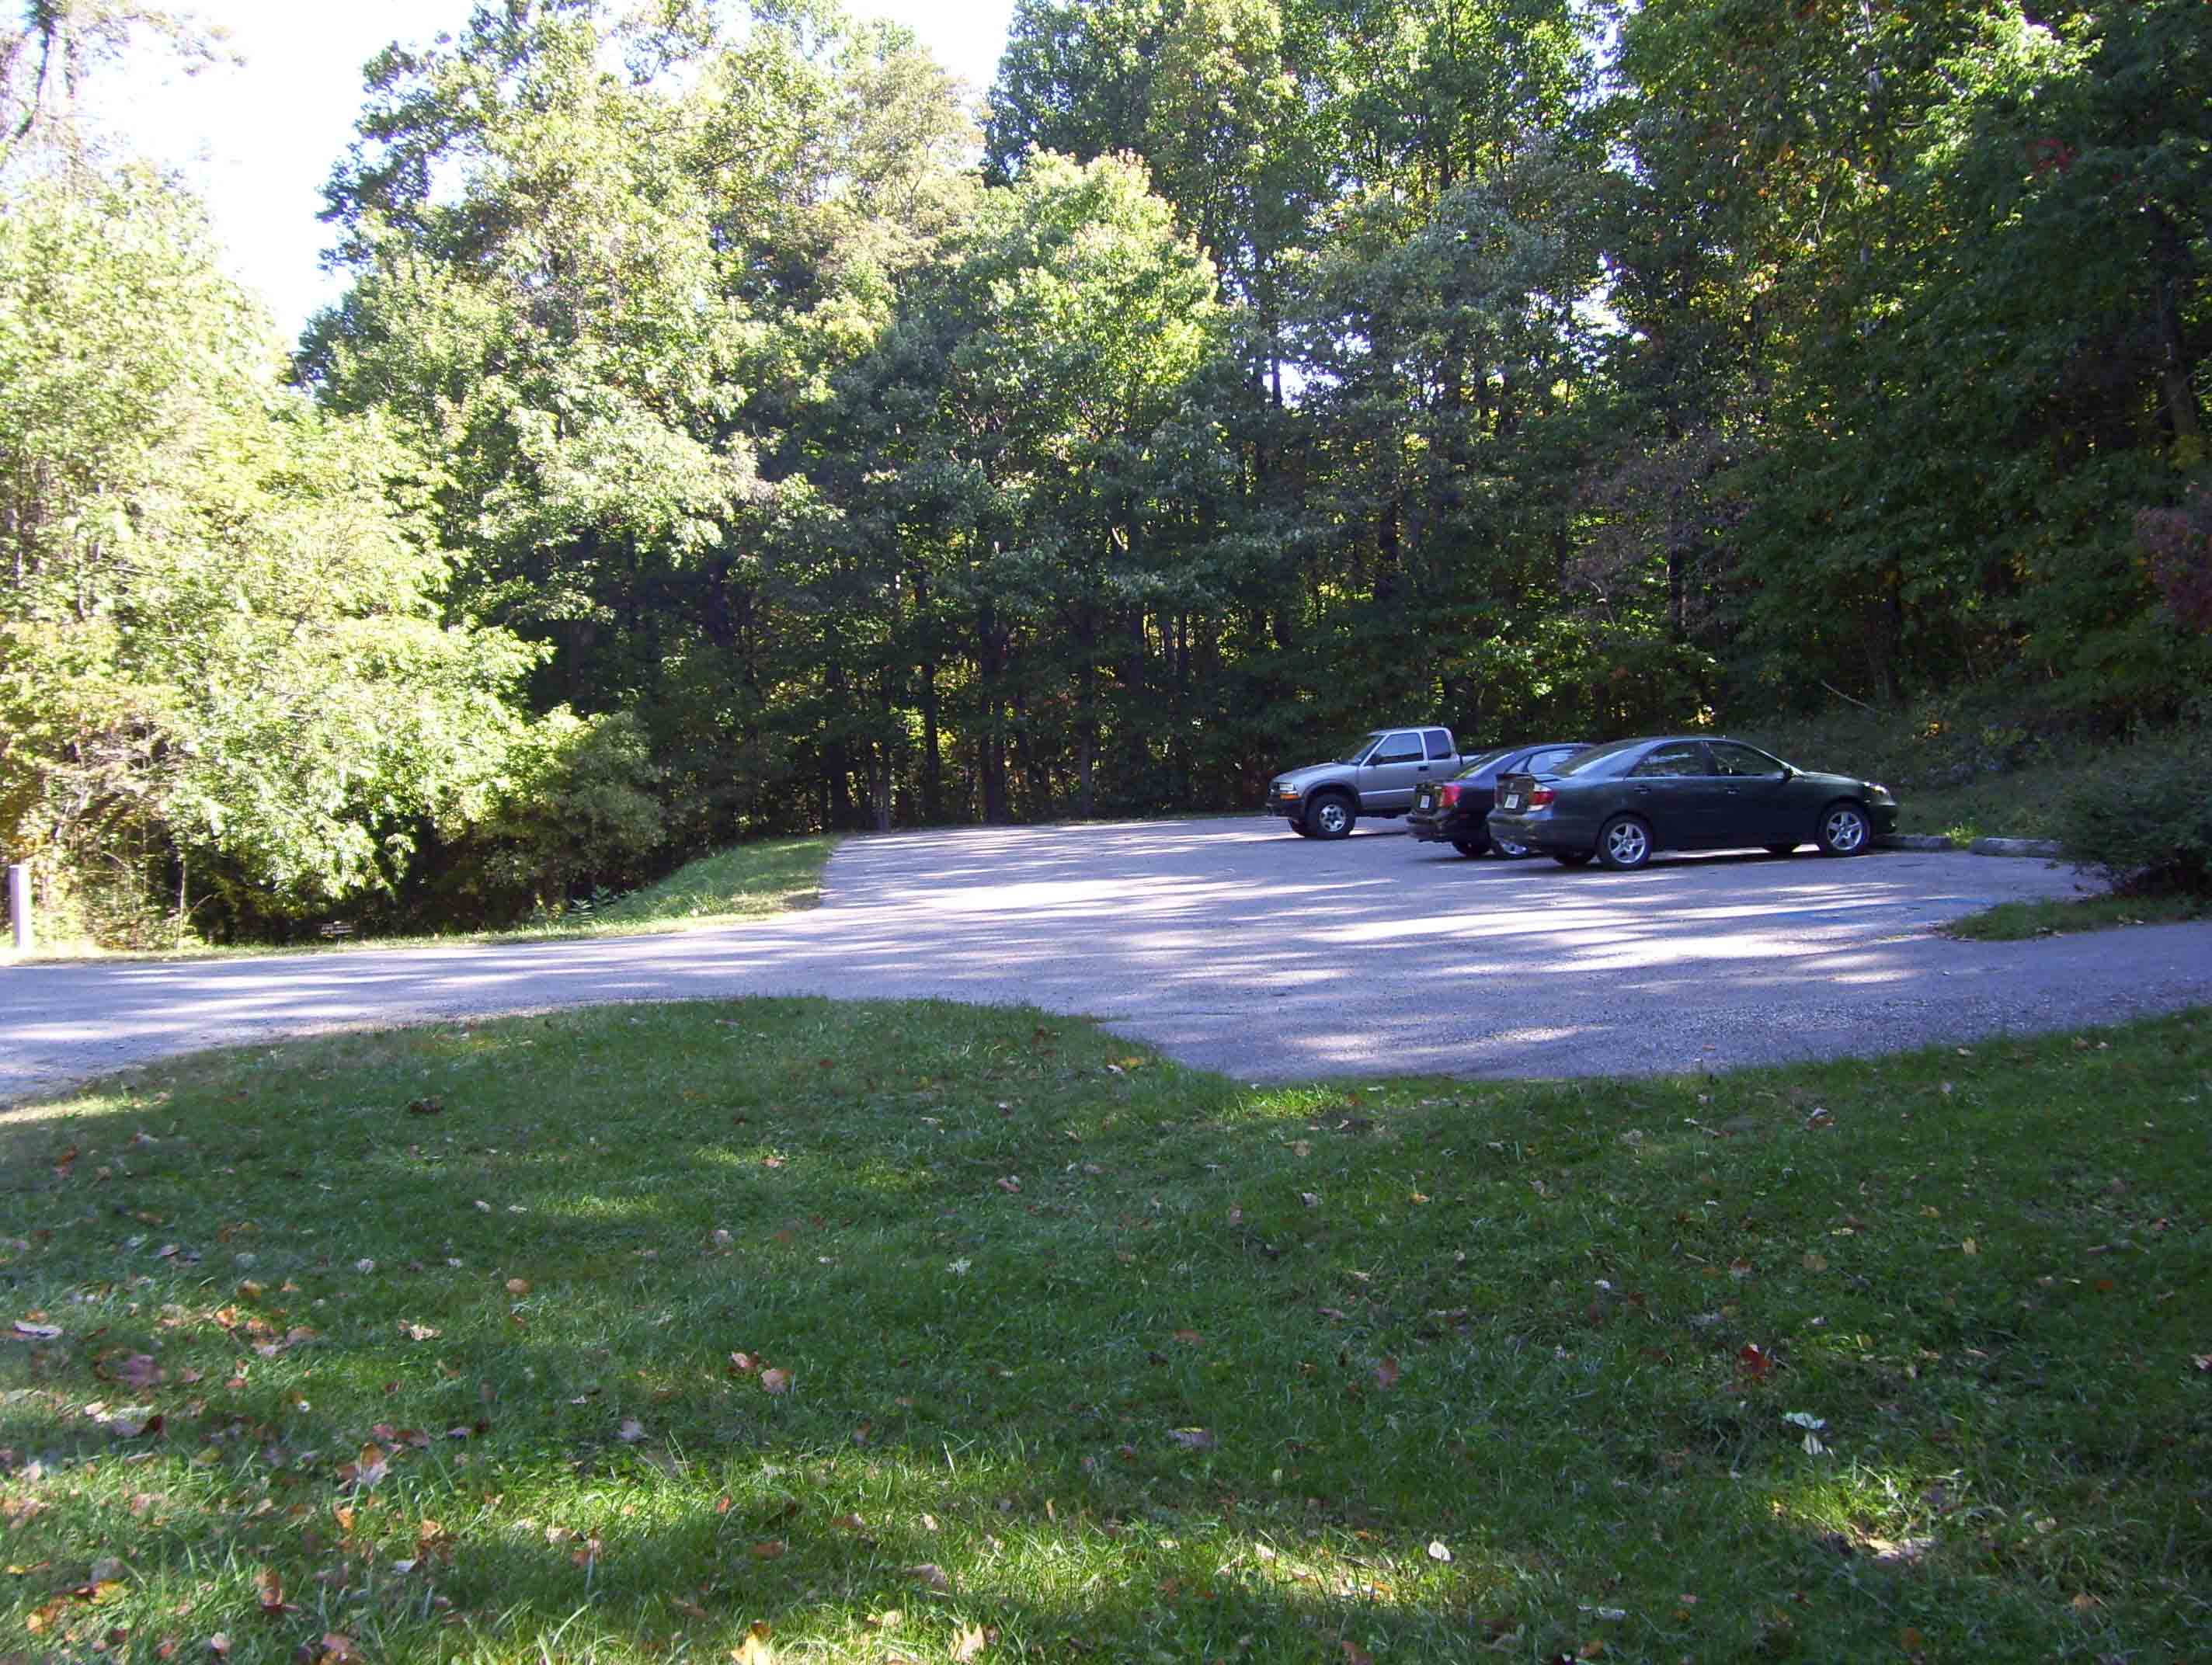 View of Parking Area at Jarman Gap. The Moormans River Fire Road starts at the grassy area on the left side of the lot and goes downhill to meet the AT at mile 13.9. The Bucks Elbow Mt. Fire Road goes to the right from the nearer end of the lot and meets the AT in 0.1 miles (Mile 14.1 of Section 13 or Mile 0.0 of Section 14).  Courtesy dlcul@conncoll.edu